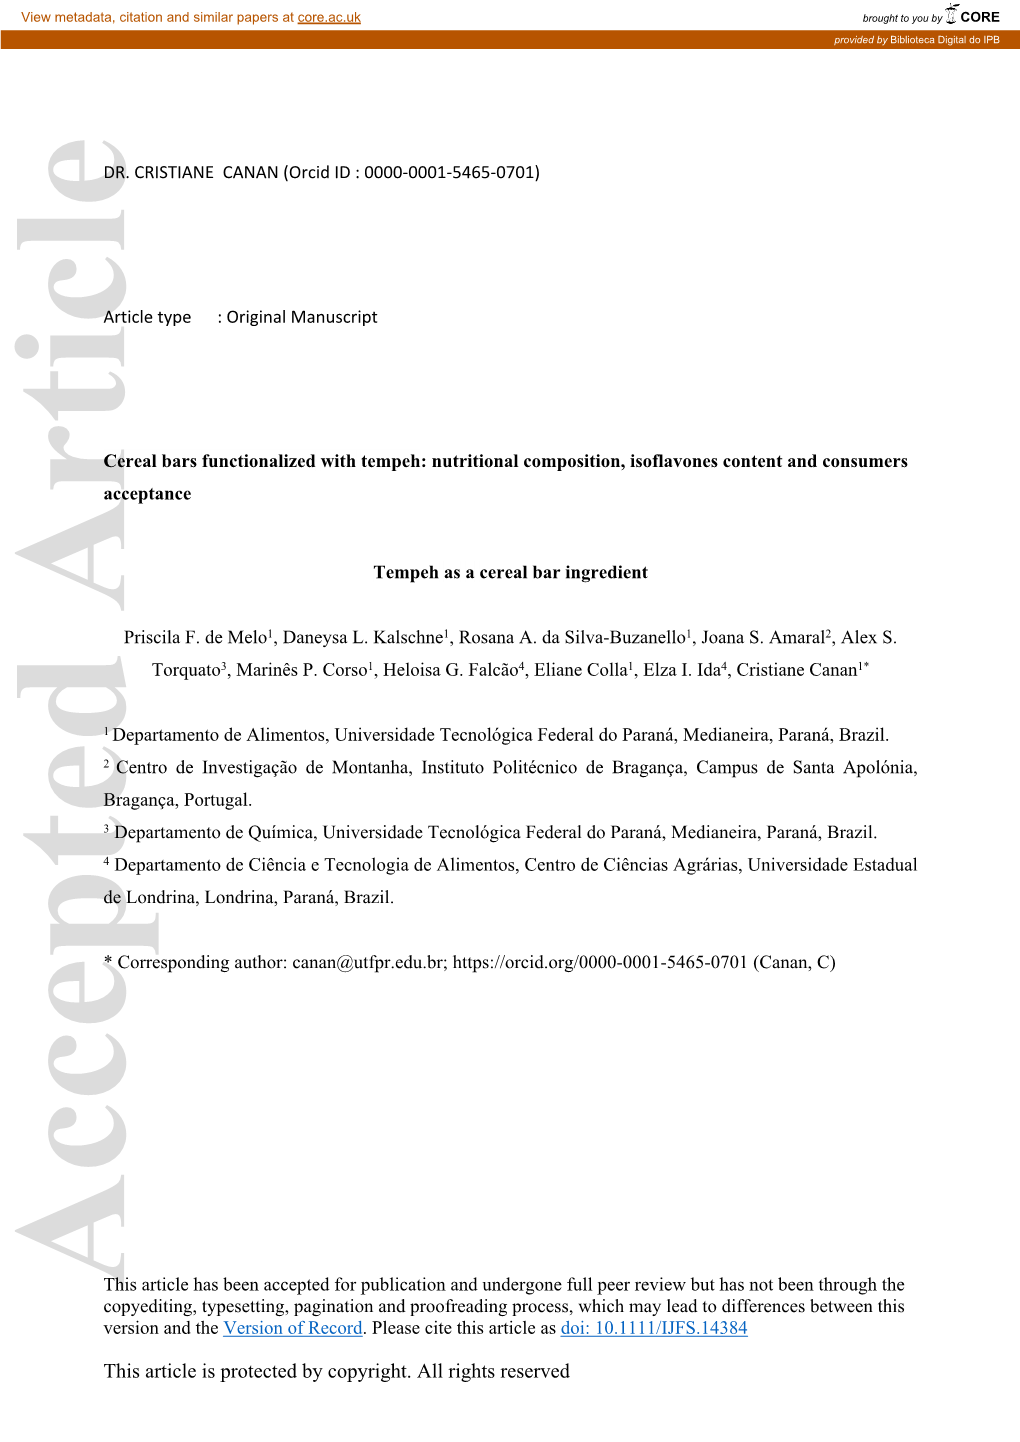 Cereal Bars Functionalized with Tempeh: Nutritional Composition, Isoflavones Content and Consumers Acceptance